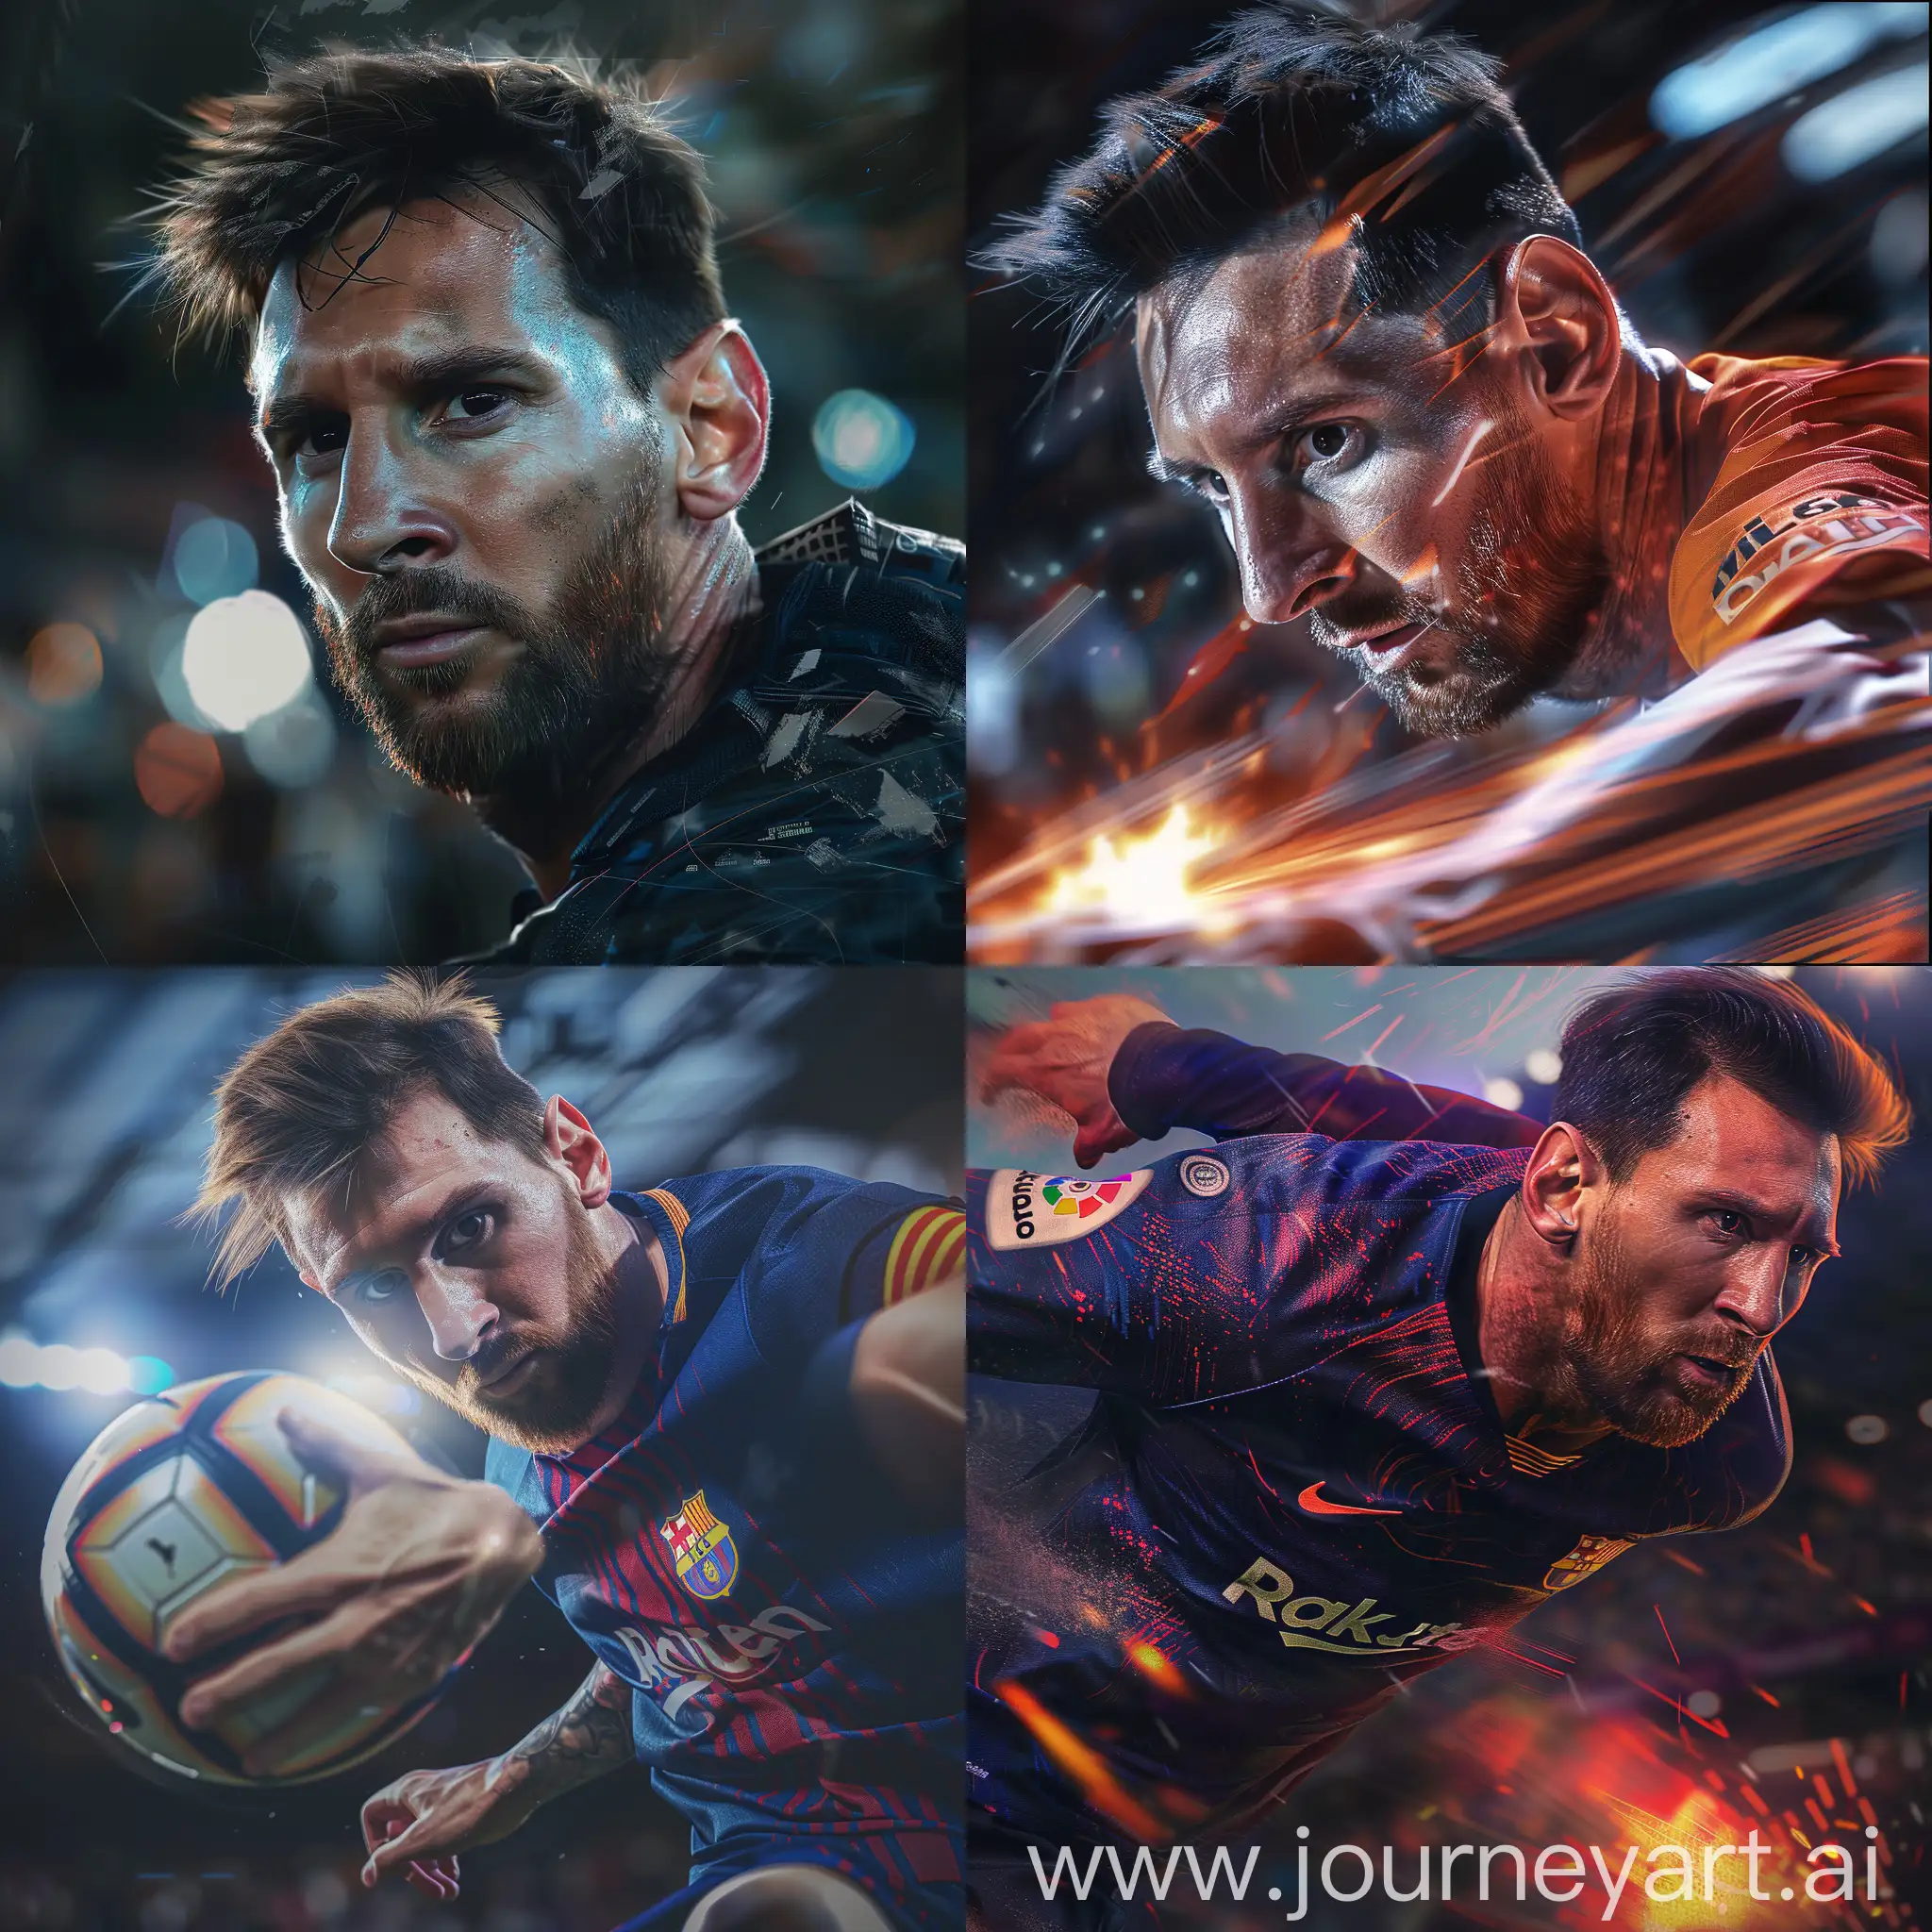 Soccer-Superstar-Messi-in-Dynamic-Action-Precision-Shot-with-Intense-Focus